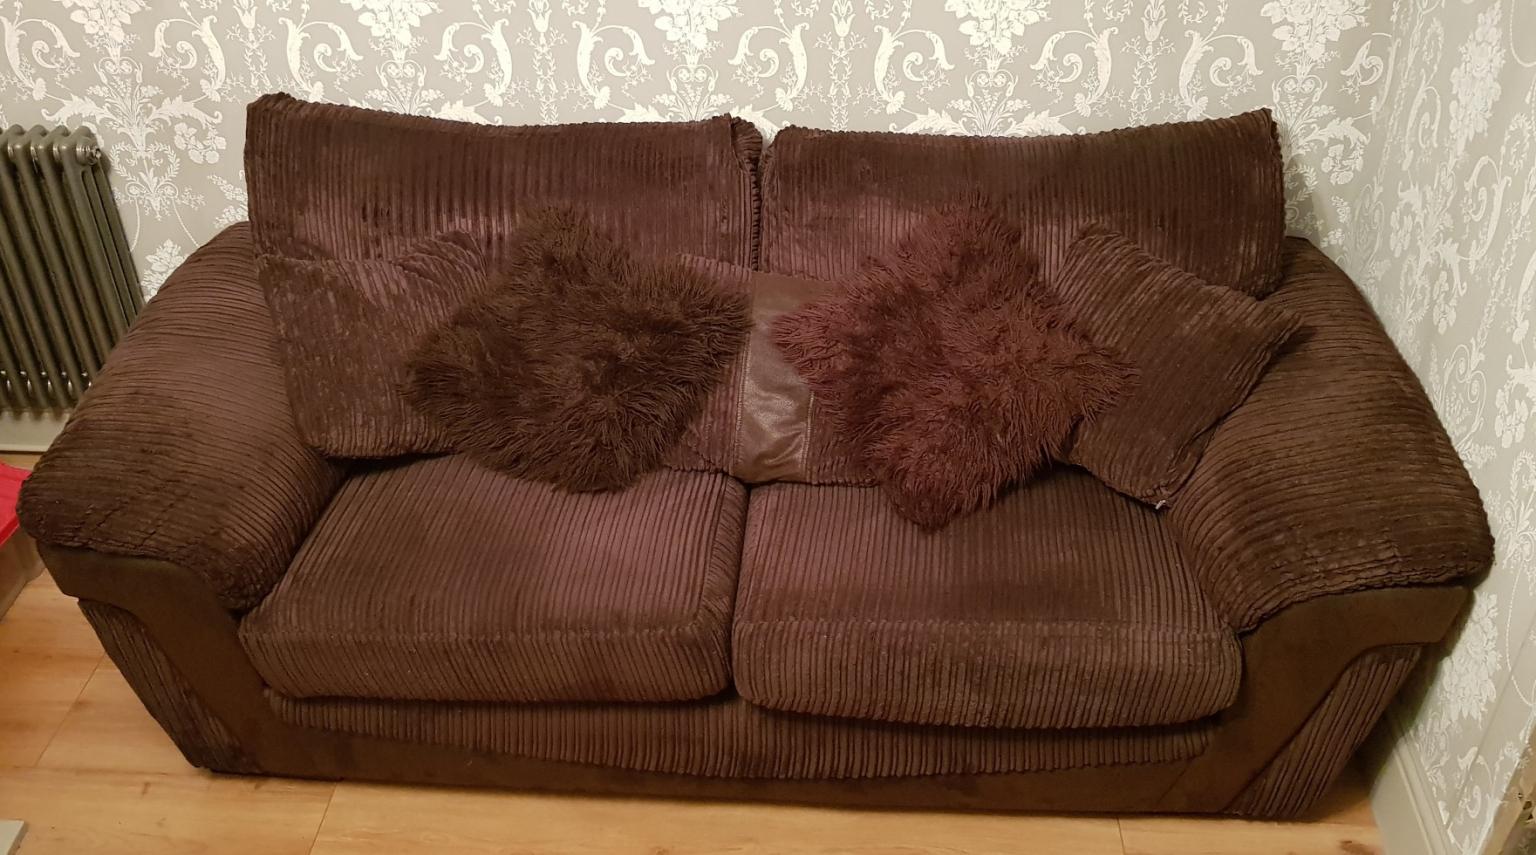 3 2 Seater Fabric Sofa Need Gone Asap In De56 Valley Fur 120